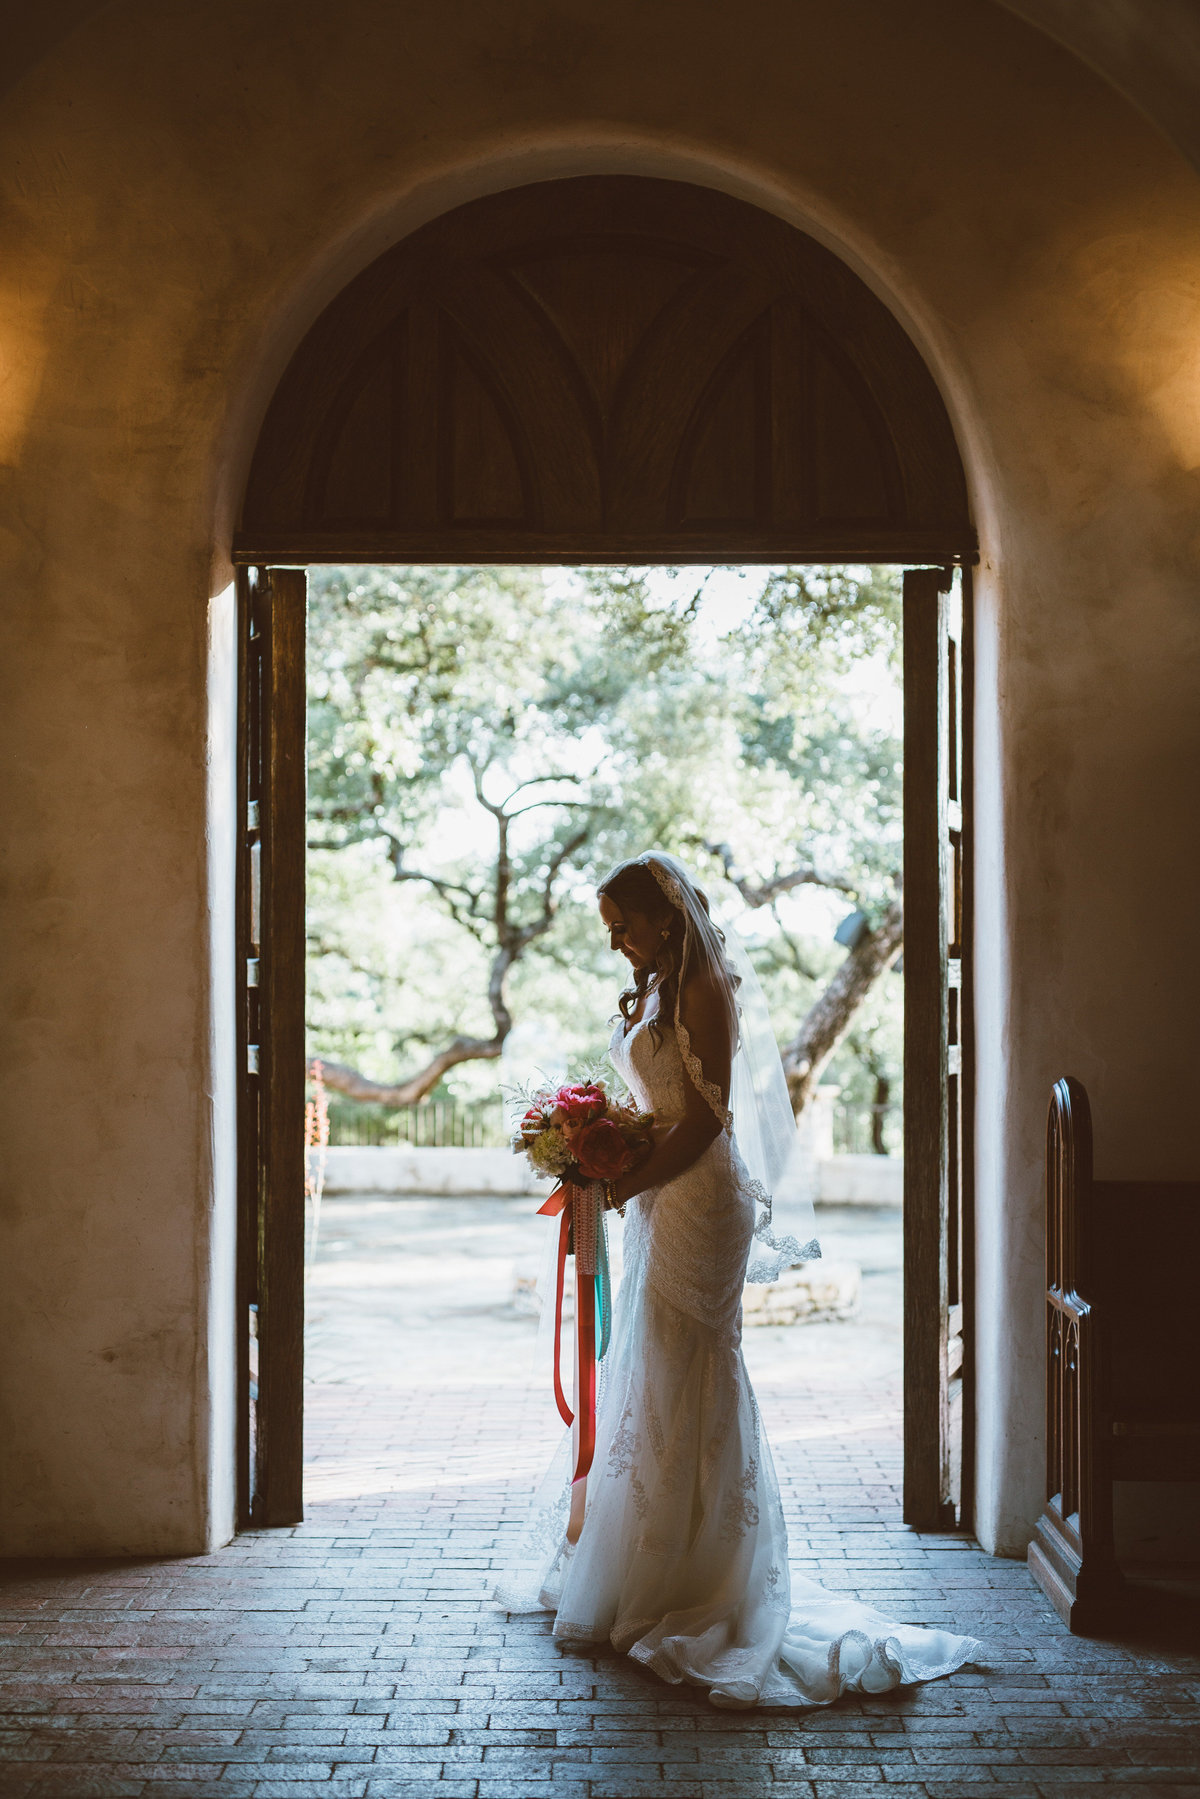 Bride standing in doorway at Lost Mission wedding venue after the wedding ceremony.